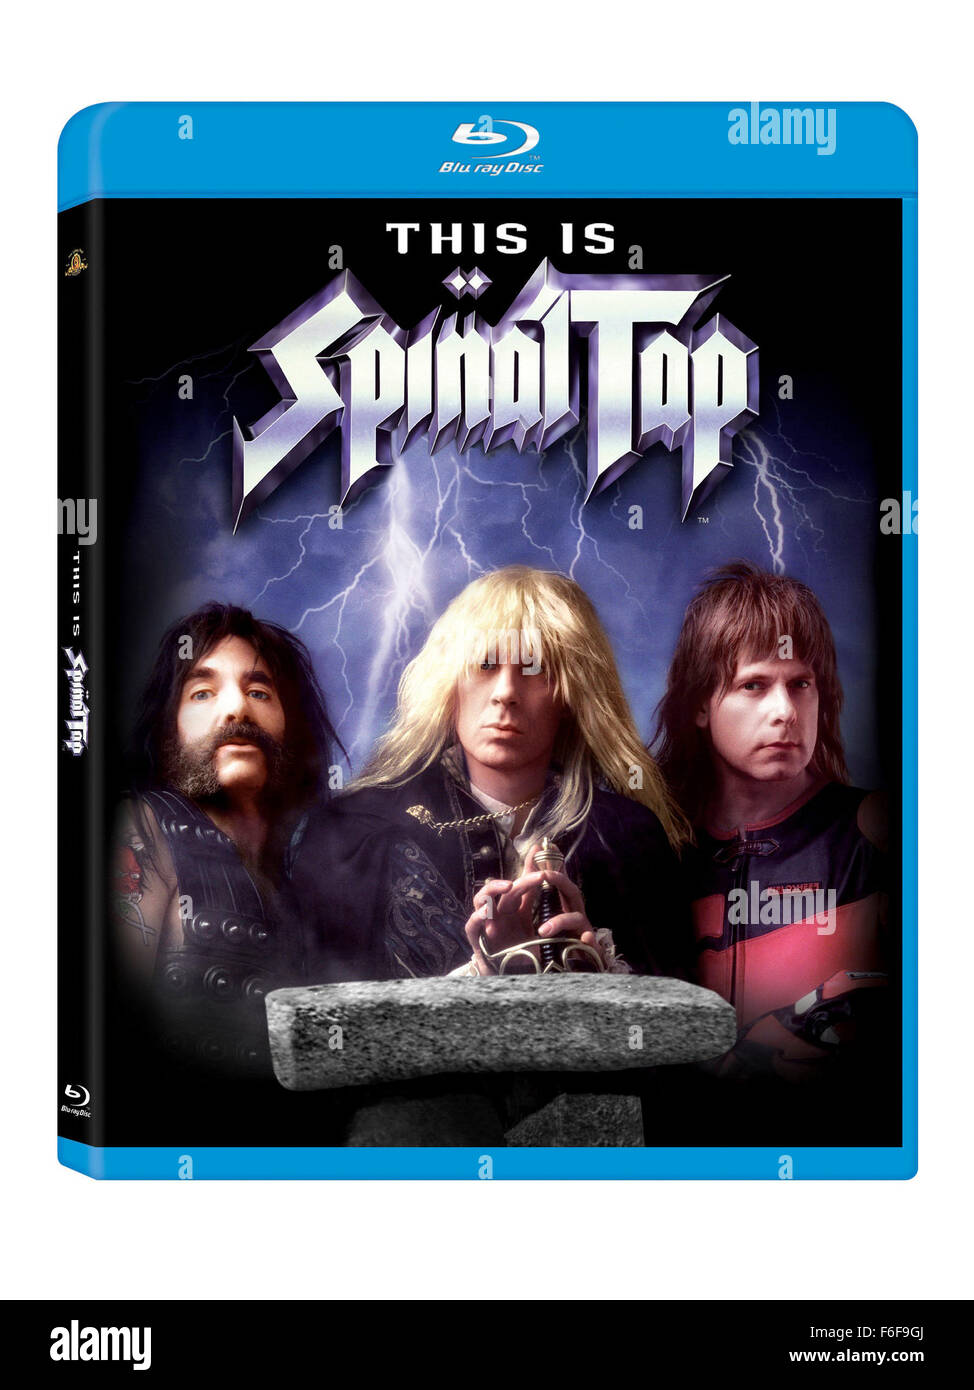 RELEASE DATE: March 2, 1984   MOVIE TITLE: This Is Spinal Tap   DIRECTOR: Rob Reiner  STUDIO: Spinal Tap Prod.   PLOT: In 1982 legendary British heavy metal band Spinal Tap attempt an American comeback tour accompanied by a fan who is also a film-maker. The resulting documentary, interspersed with powerful performances of Tap's pivotal music and profound lyrics, candidly follows a rock group heading towards crisis, culminating in the infamous affair of the eighteen-inch-high Stonehenge stage prop   PICTURED: MICHAEL MCKEAN as David St. Hubbins, CHRISTOPHER GUEST as Nigel Tufnel and HARRY SHEAR Stock Photo